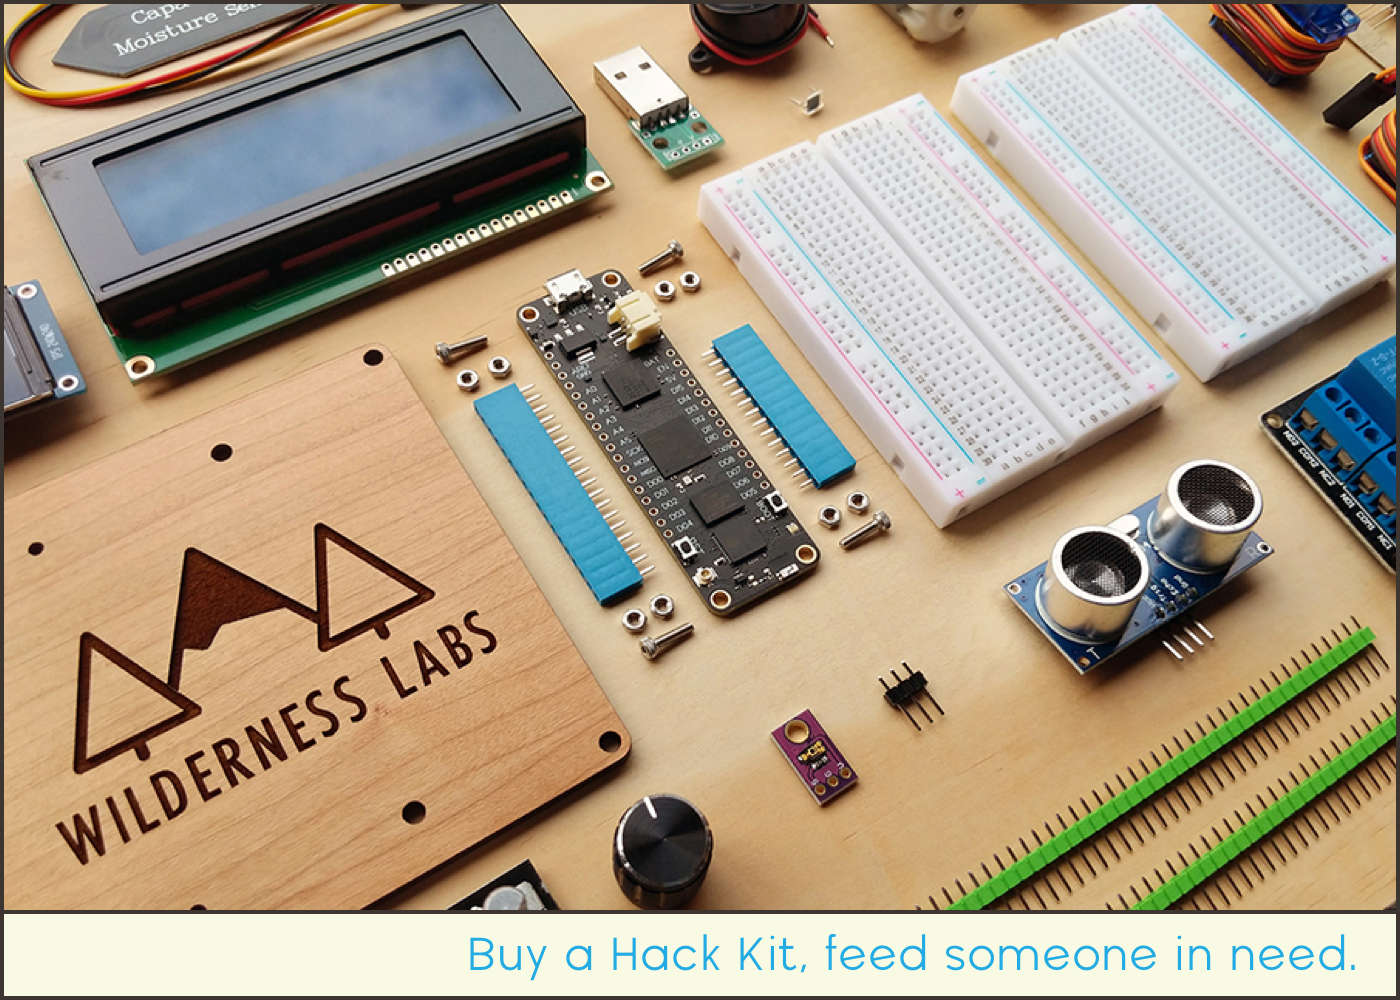 Buy a Hack Kit, Feed Someone in Need.